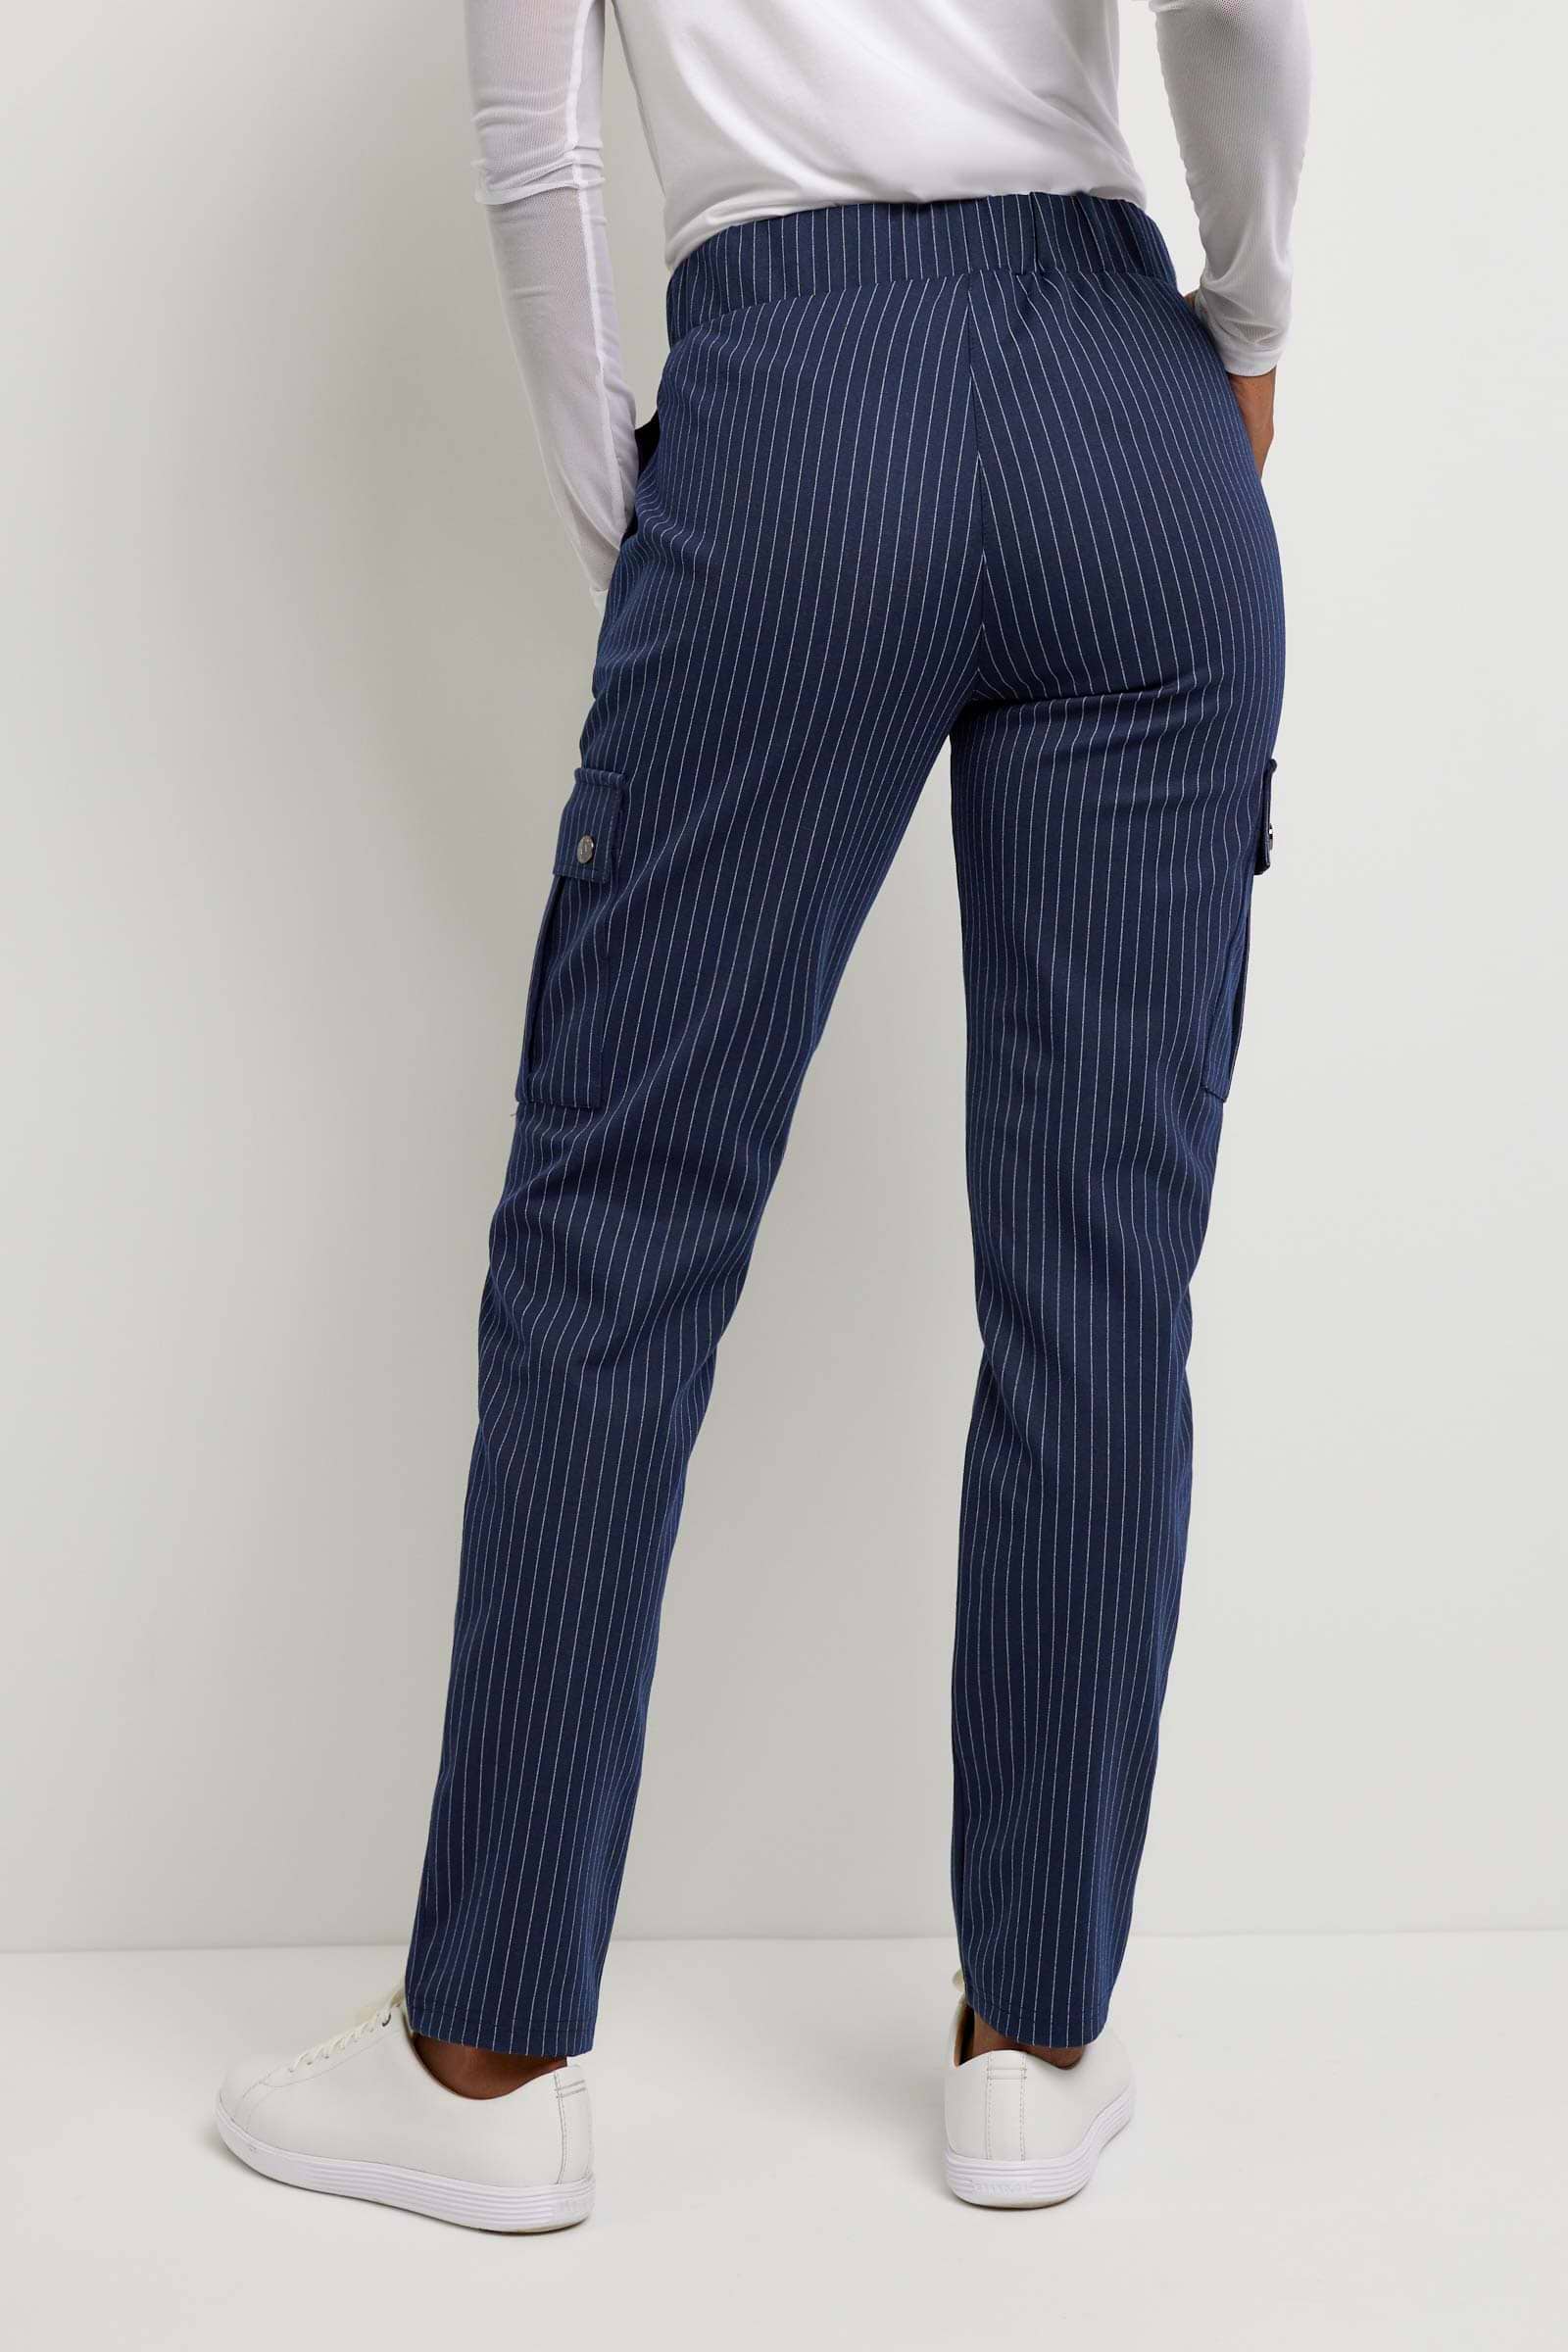 The Best Travel Pant. Back Profile of an Indie Pant in Navy/White.